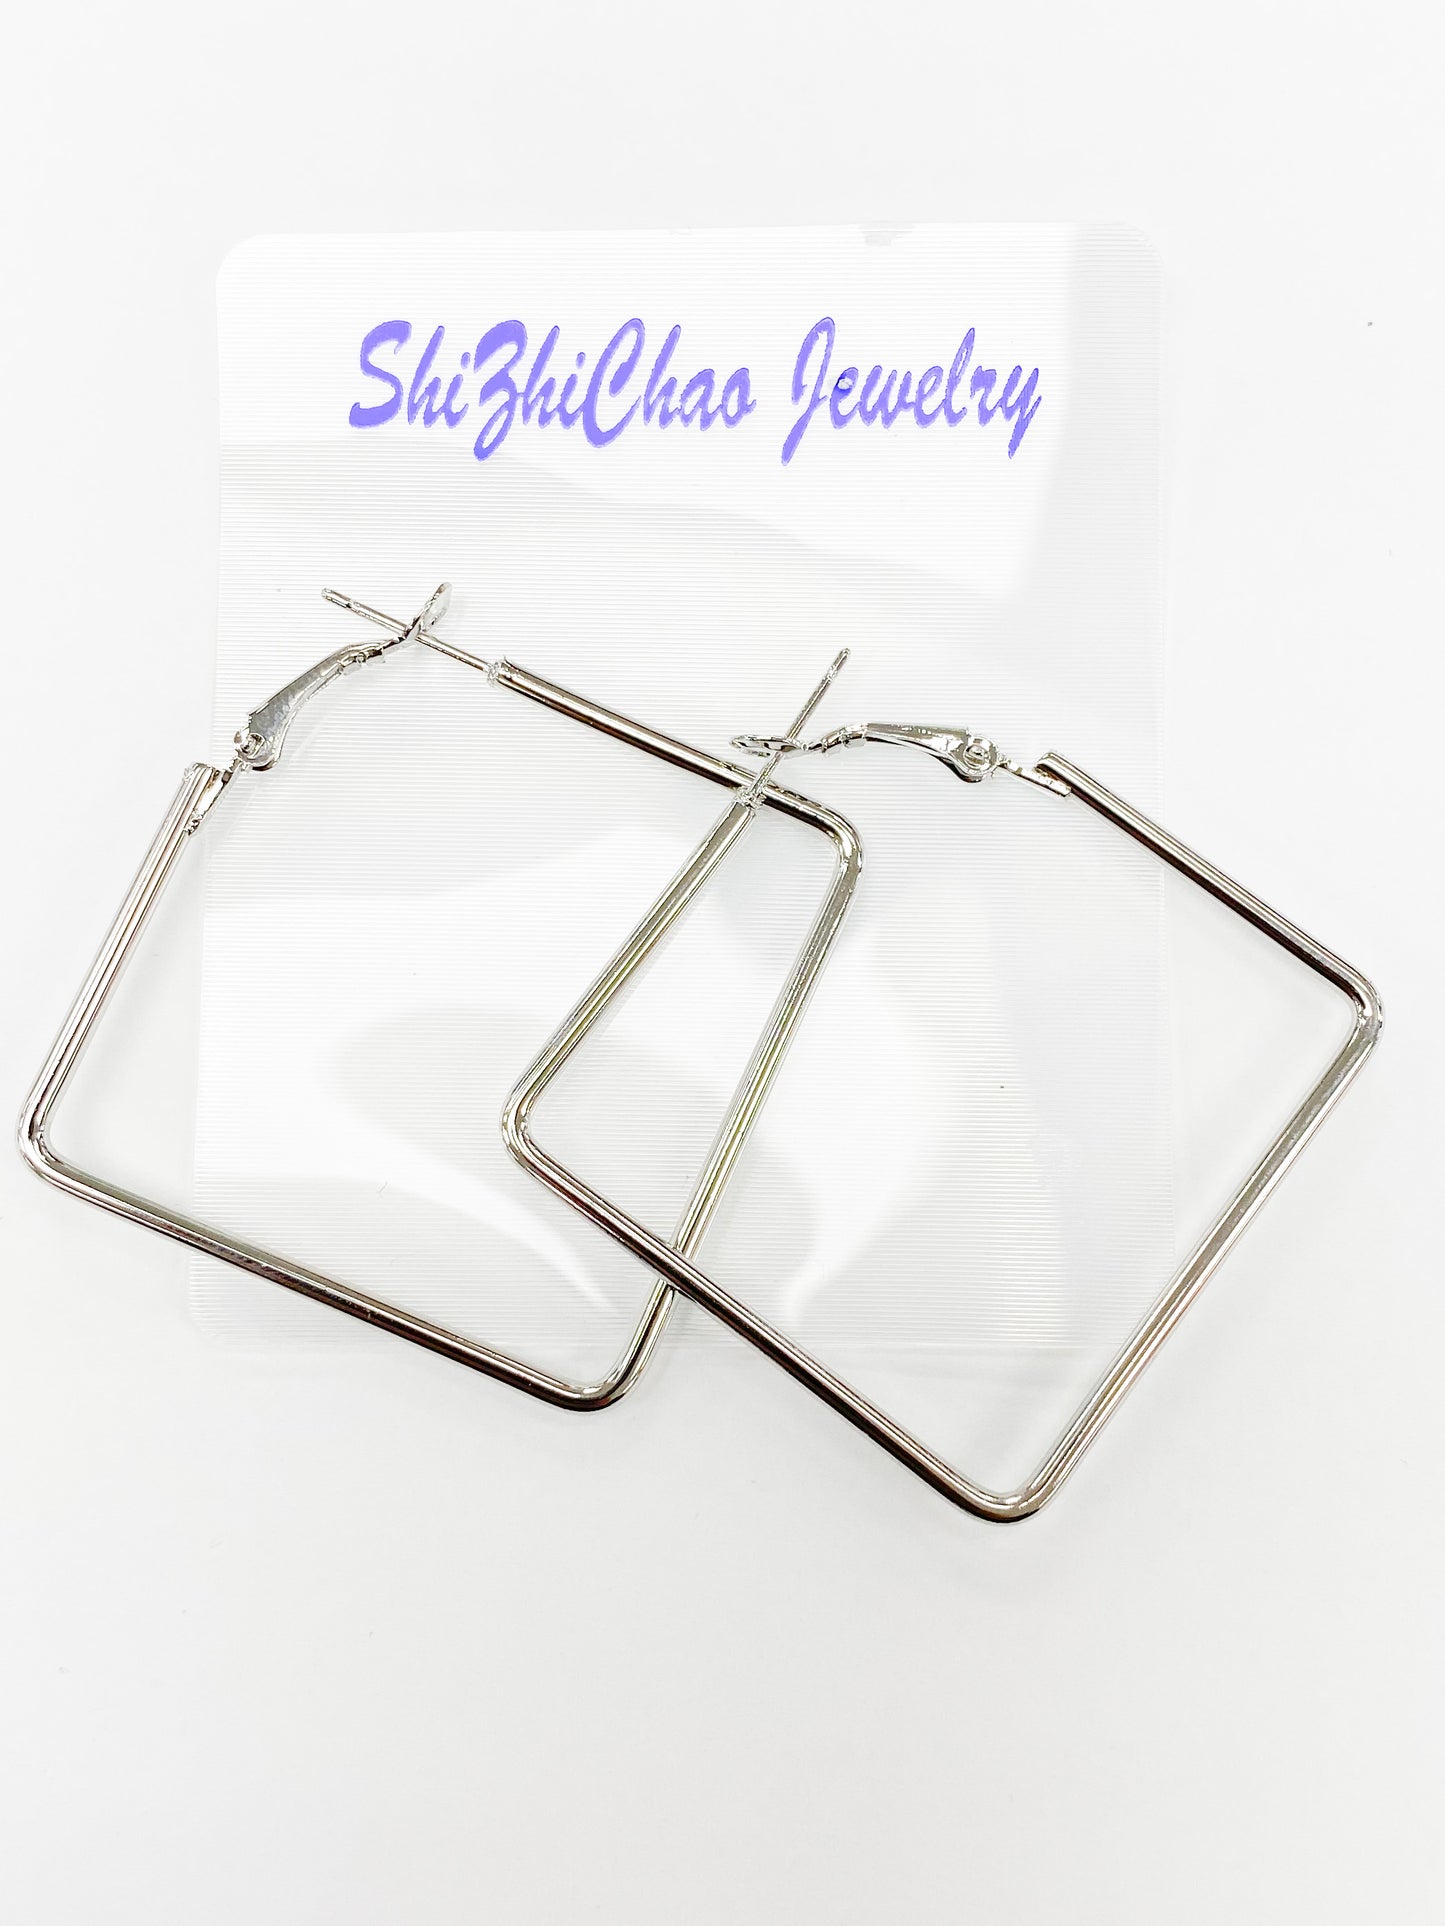 54mm x 54mm Silver Square Earring For Beading Around, 2mm Thickness